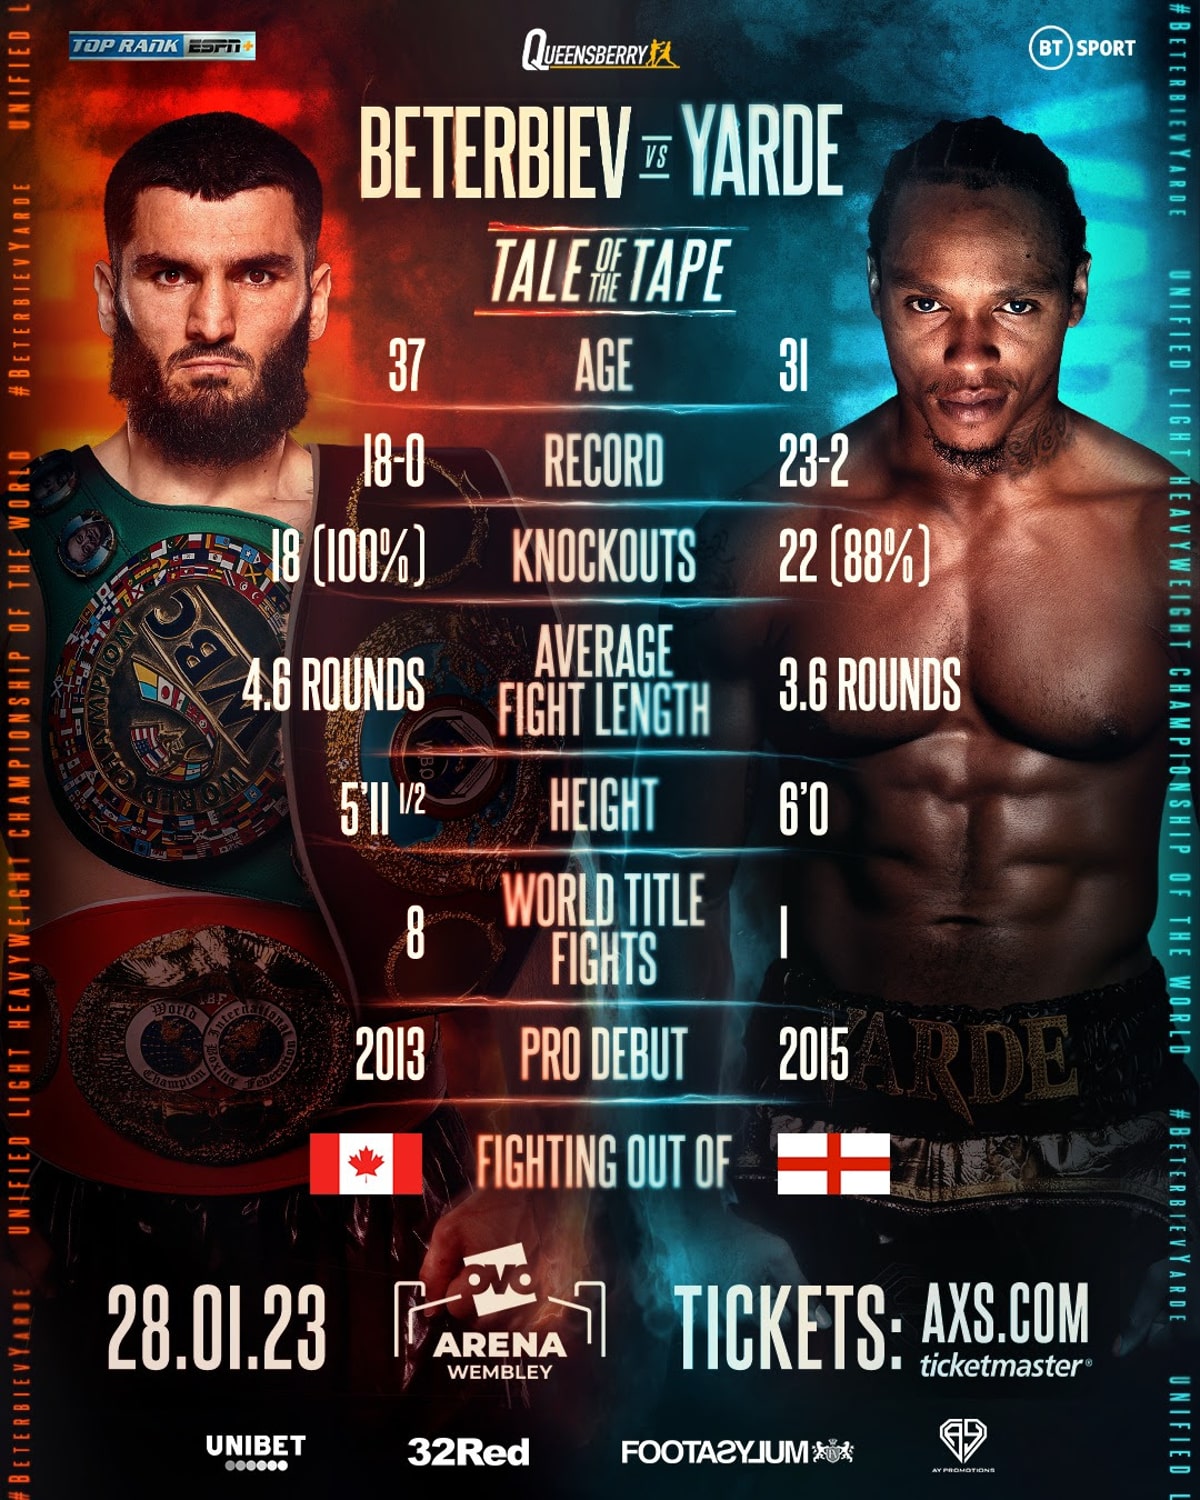 Artur Beterbiev on Anthony Yarde fight: "I come to do my work"